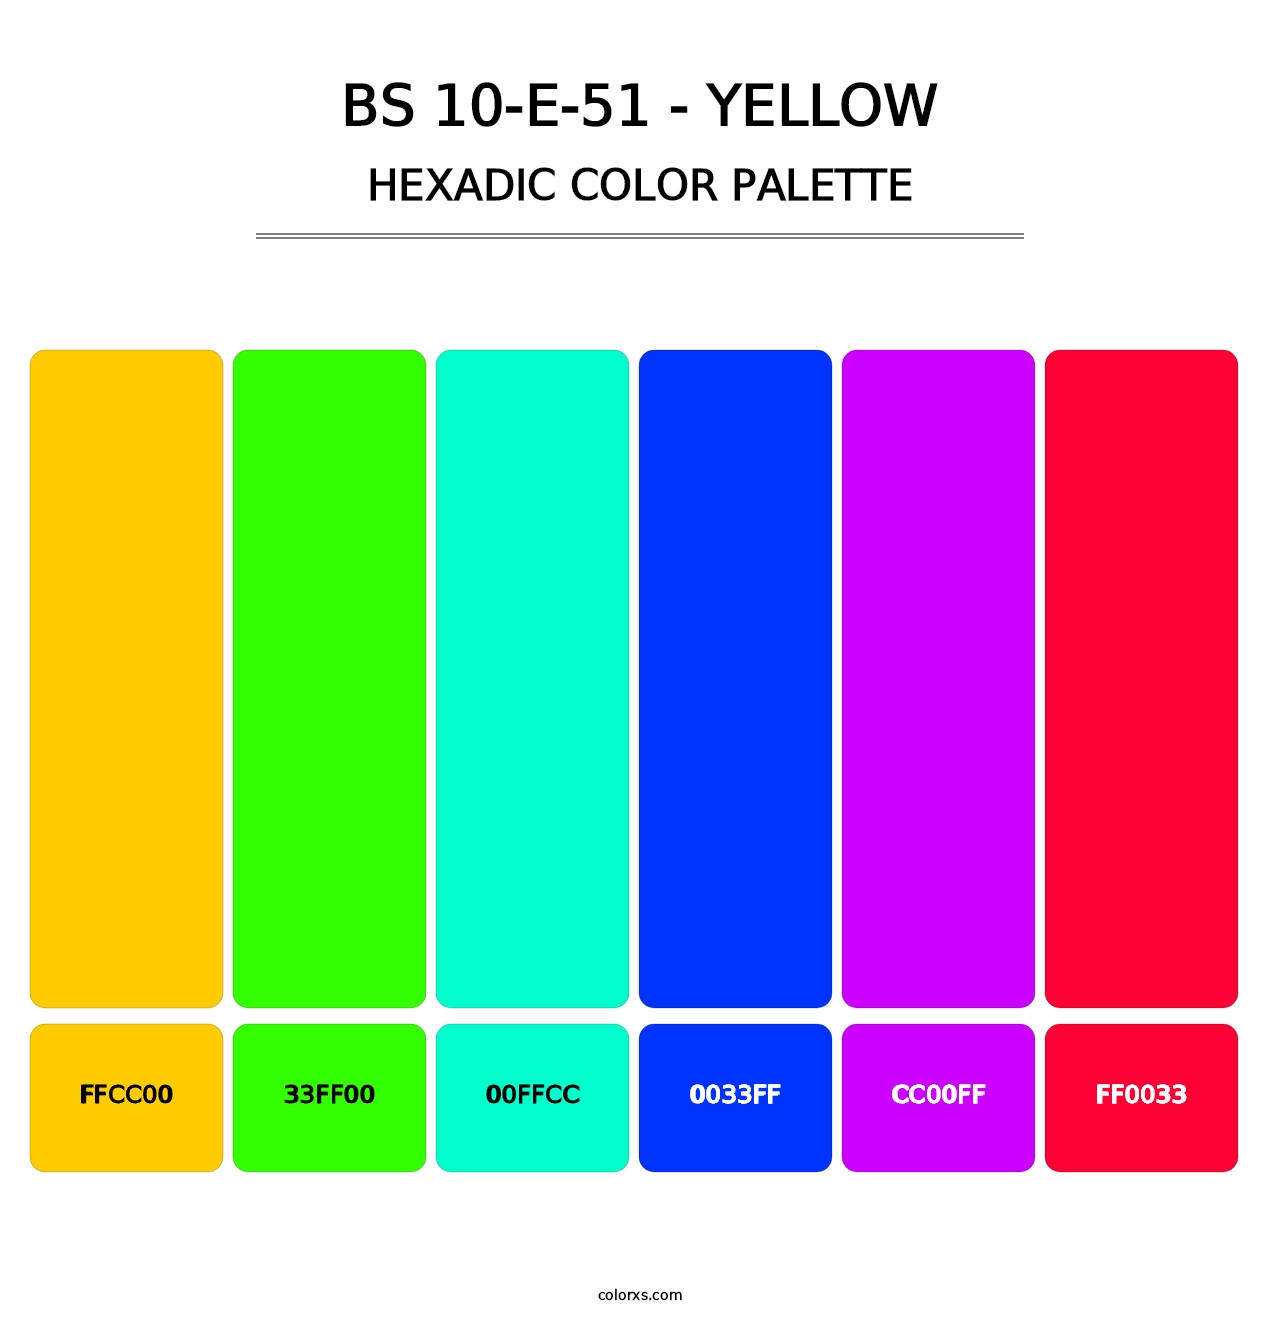 BS 10-E-51 - Yellow - Hexadic Color Palette